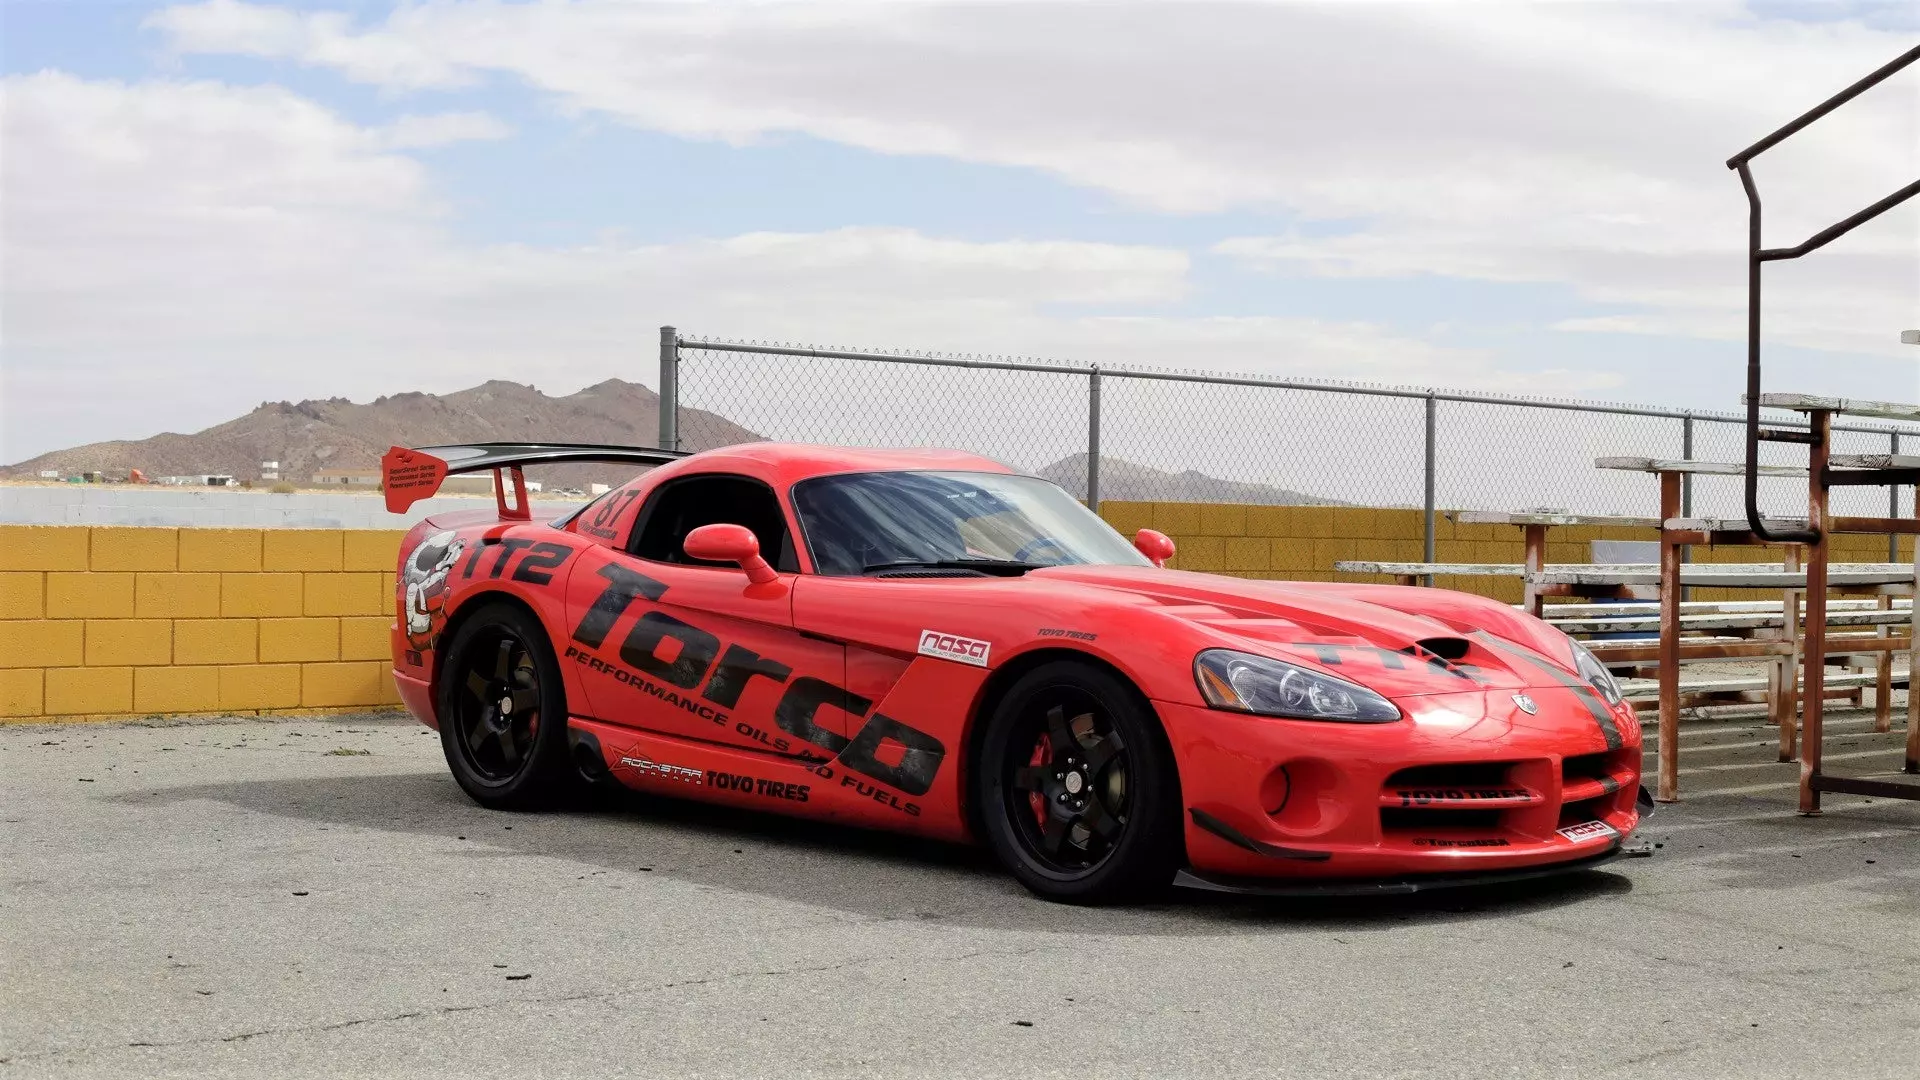 I Still Think About the Track Laps I Rode Shotgun in This Dodge Viper ACR